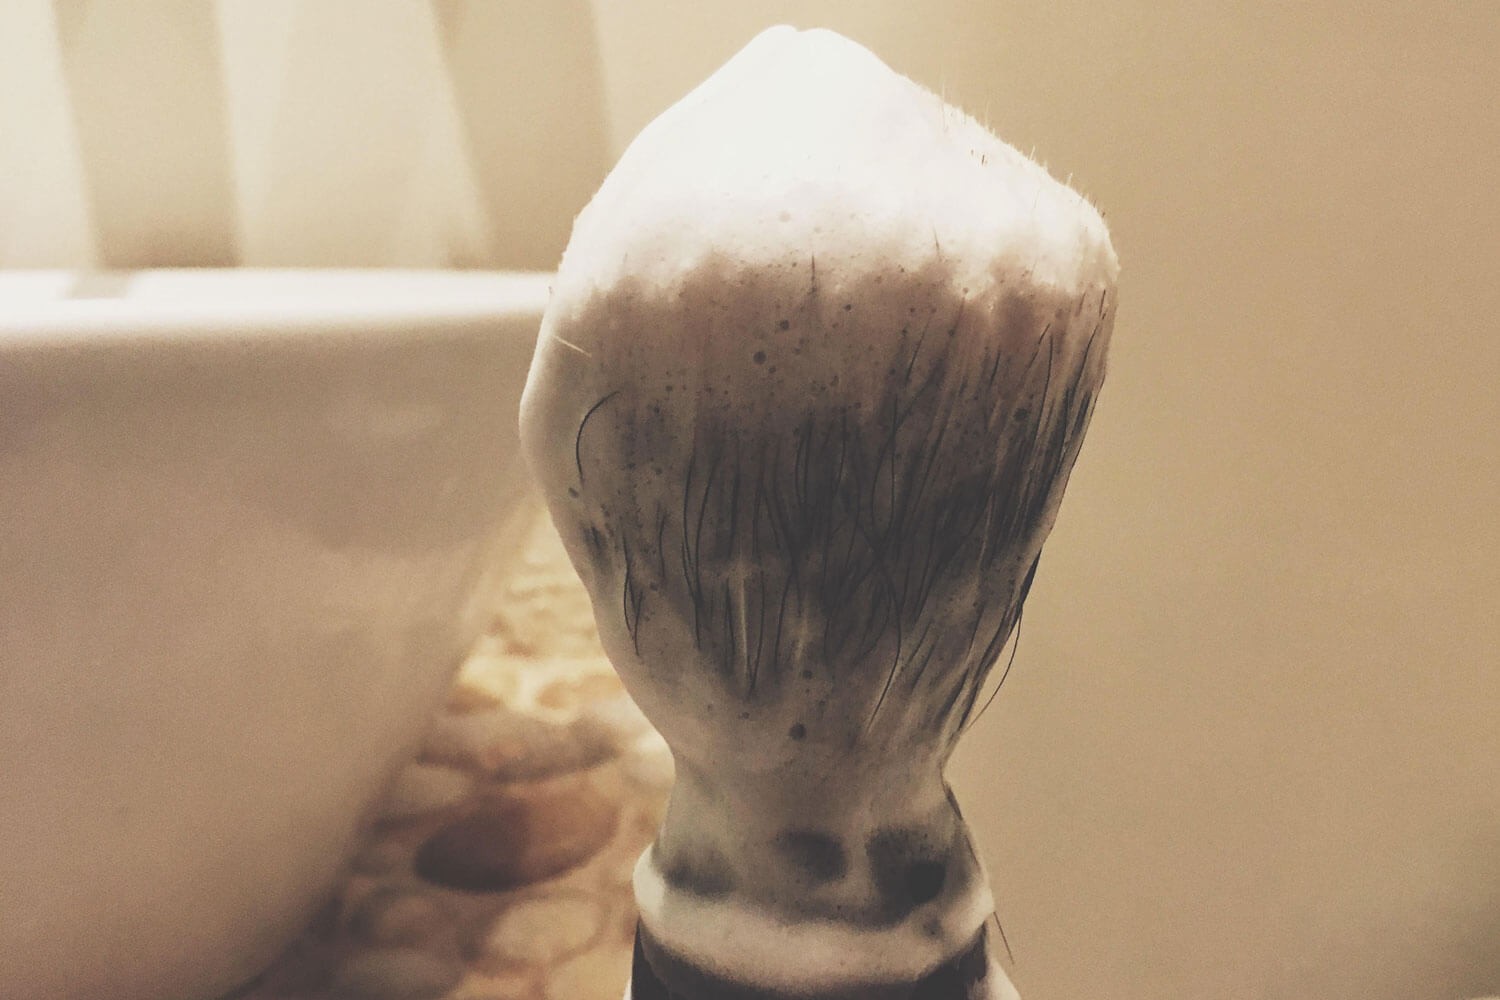 How To Use A Shaving Soap And Get A Barbershop Quality Lather